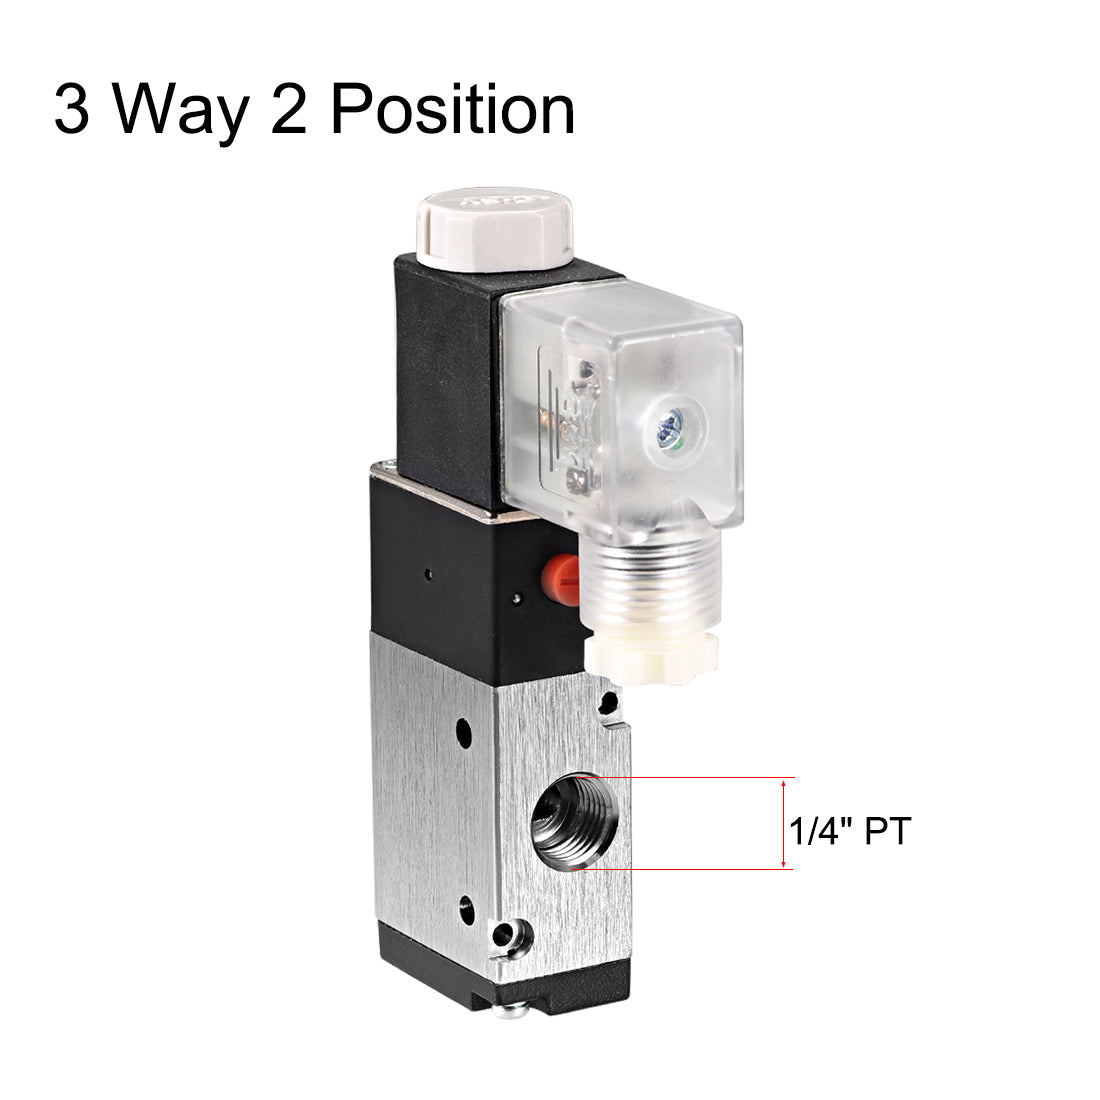 uxcell Uxcell 3V210-08 Pneumatic Air NO Single Piloted  Electrical Control Solenoid Valve DC 12V 3 Way 2 Position 1/4" PT Internally Acting Type w LED Light